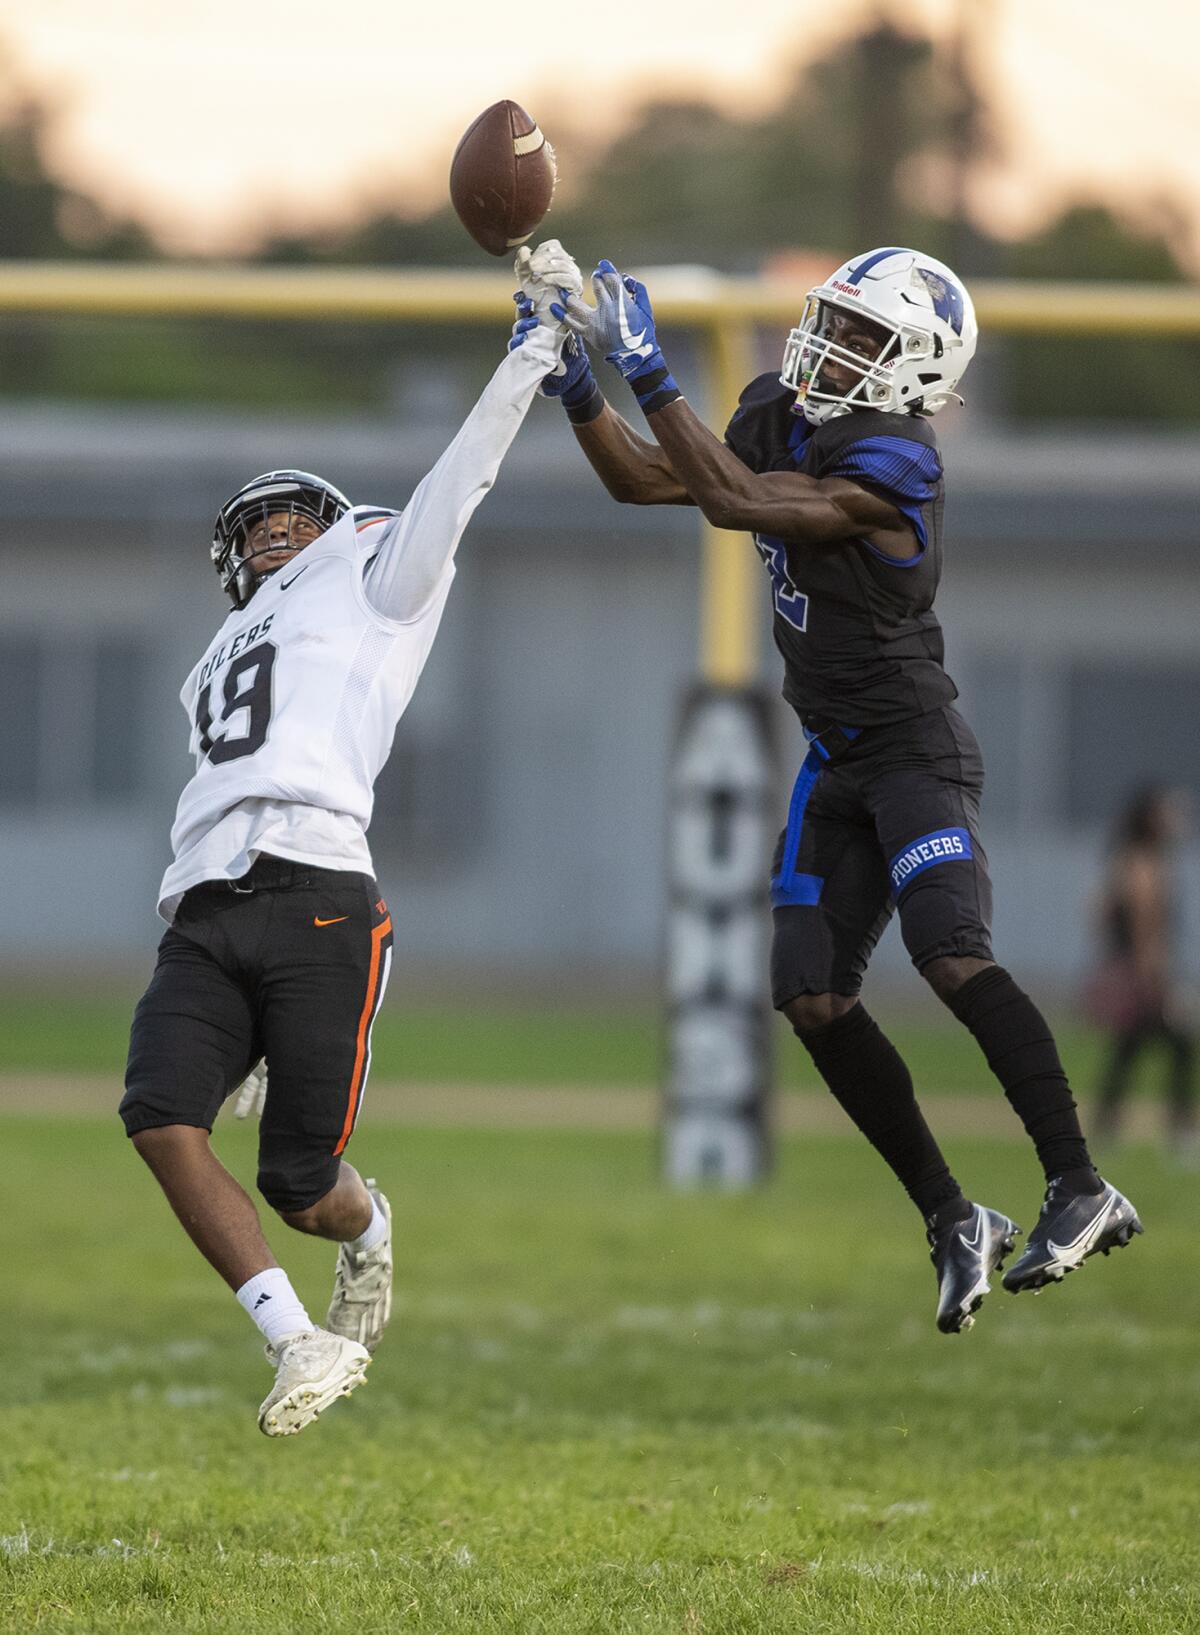 Huntington Beach's Quincy Hankins breaks up a pass intended for Western's Drew Faulkner during a nonleague game on Thursday.